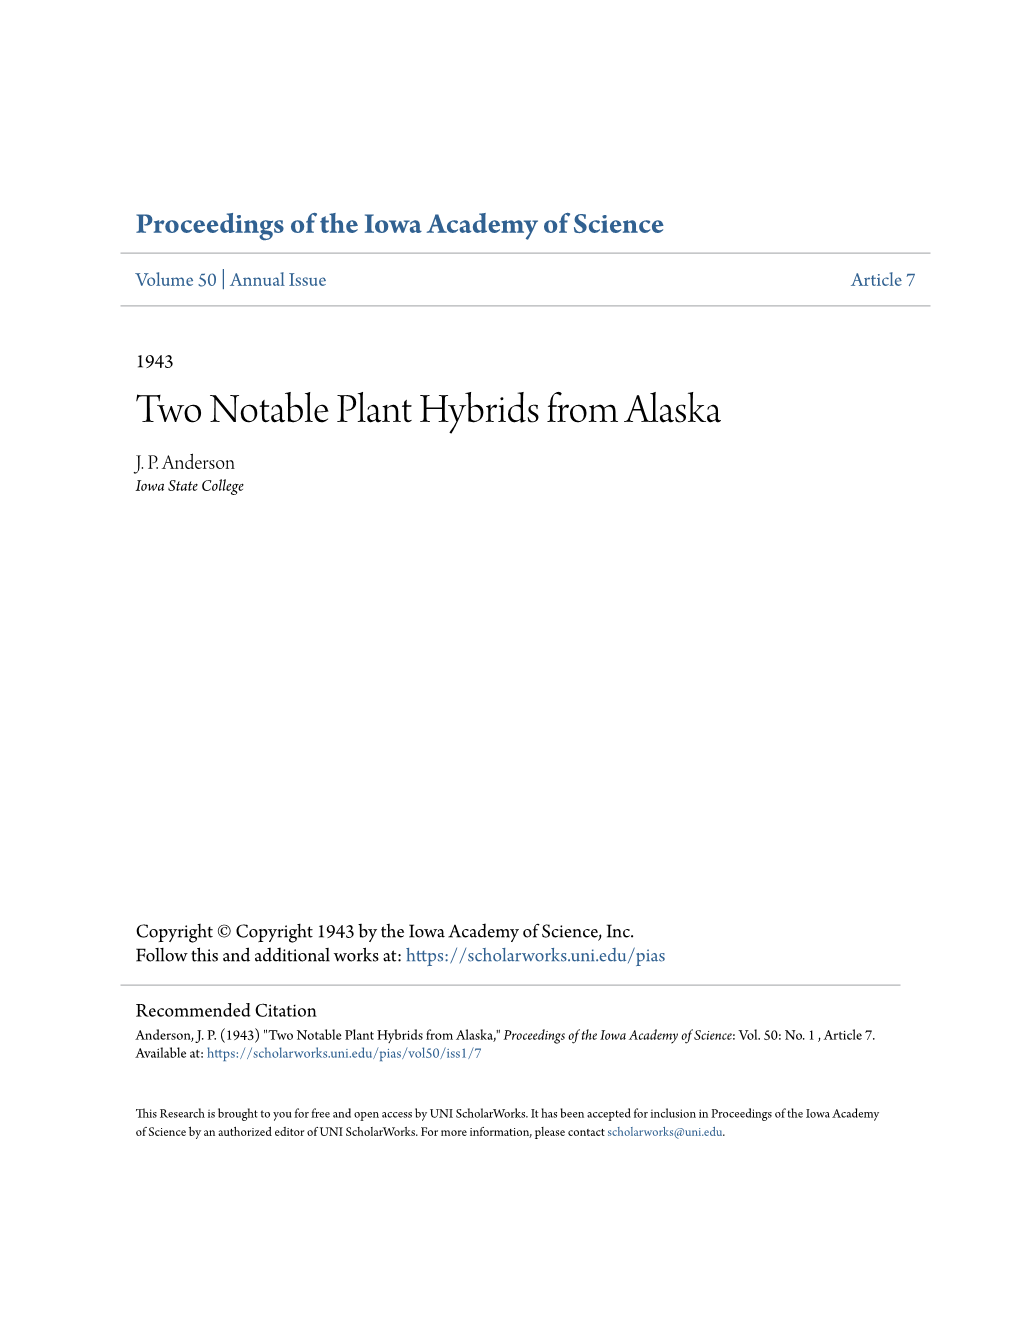 Two Notable Plant Hybrids from Alaska J